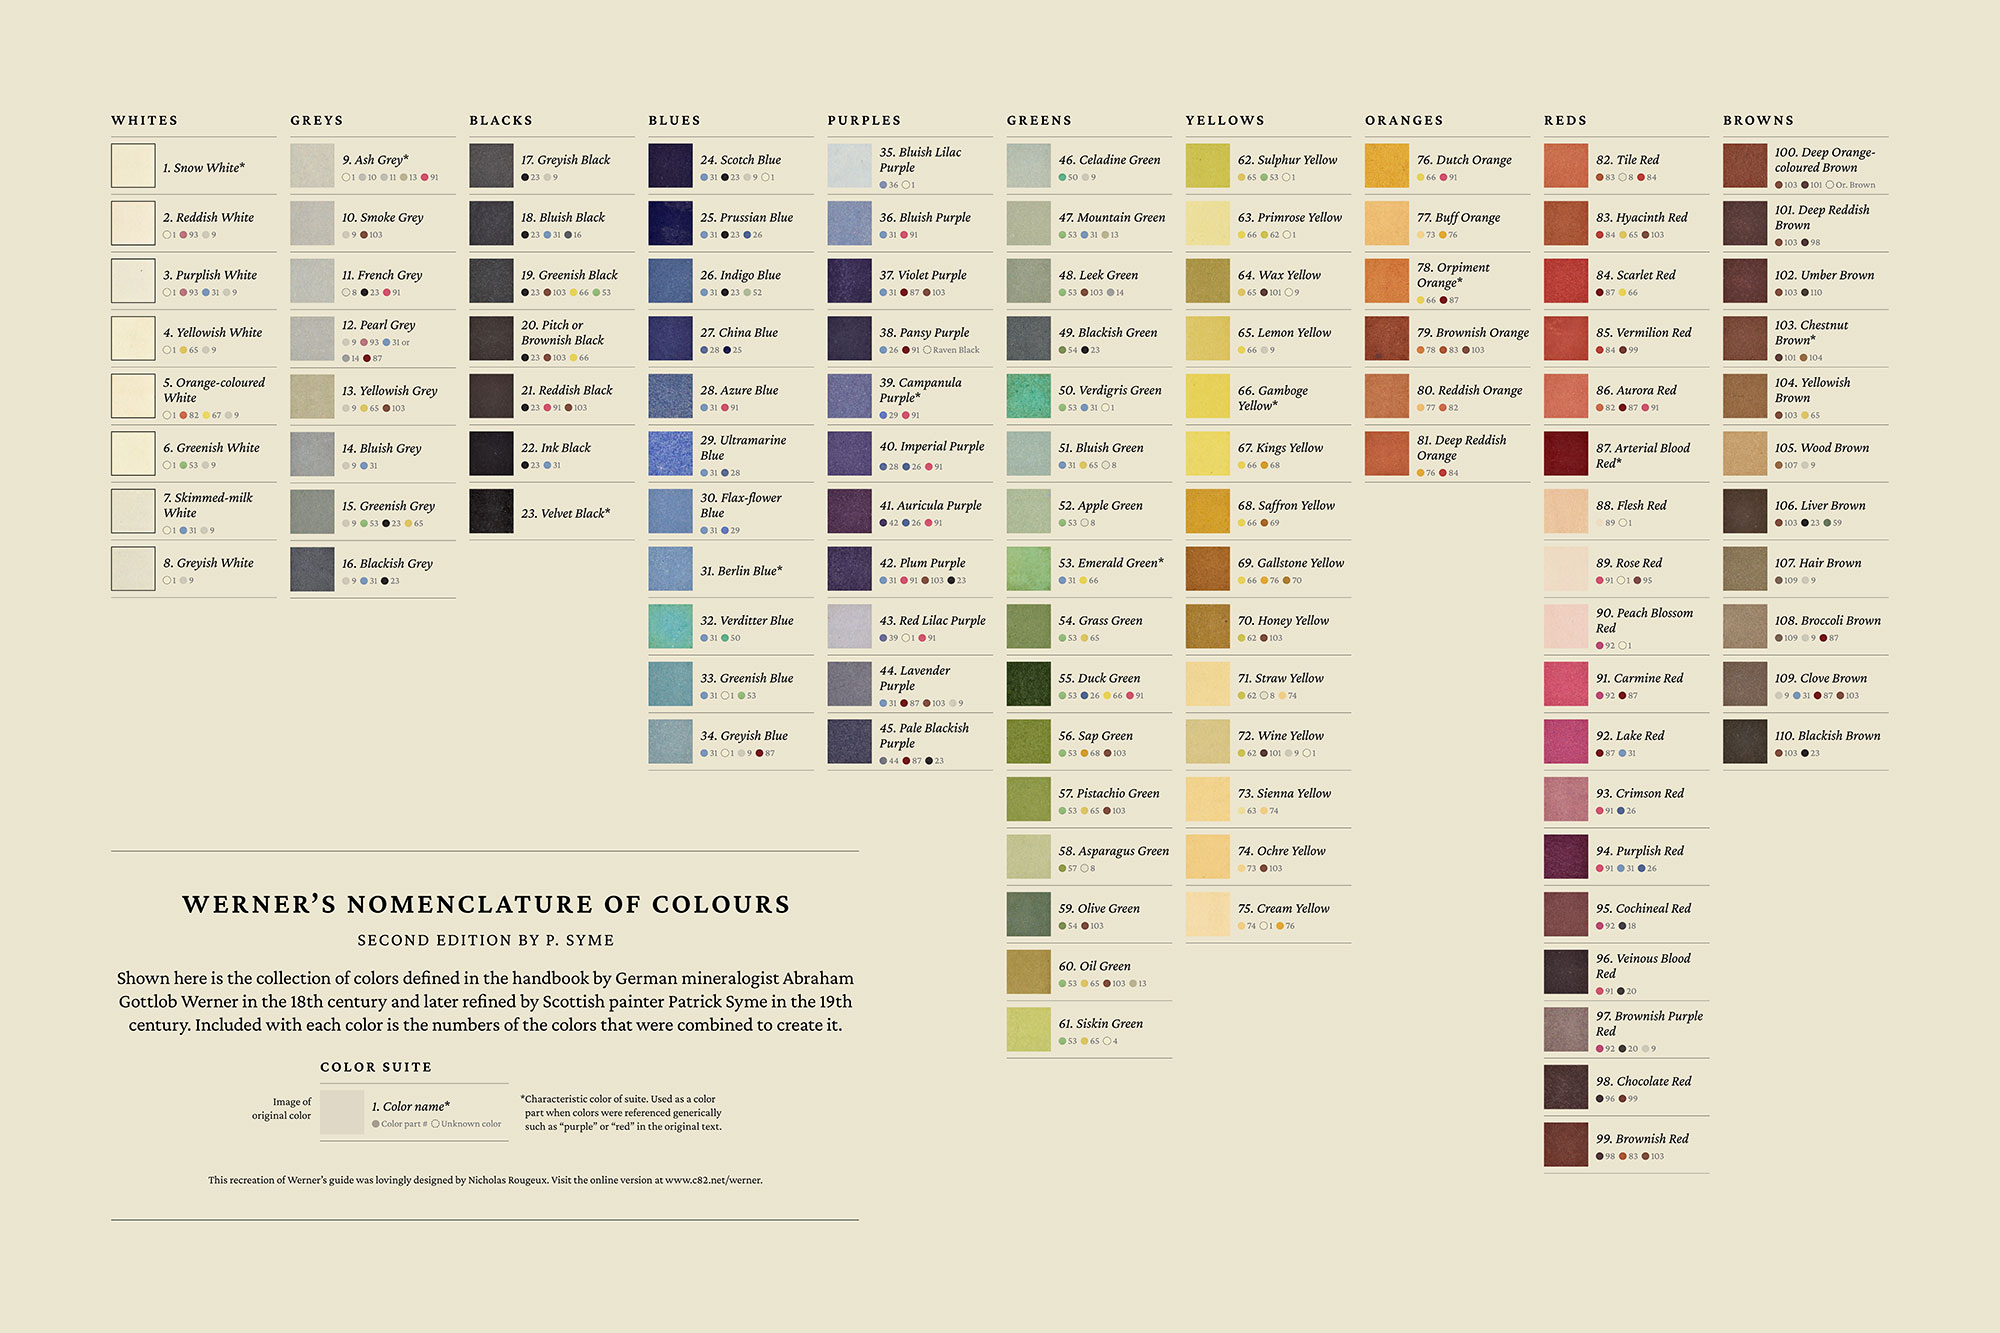 The Postcards Werner's Nomenclature of Colours